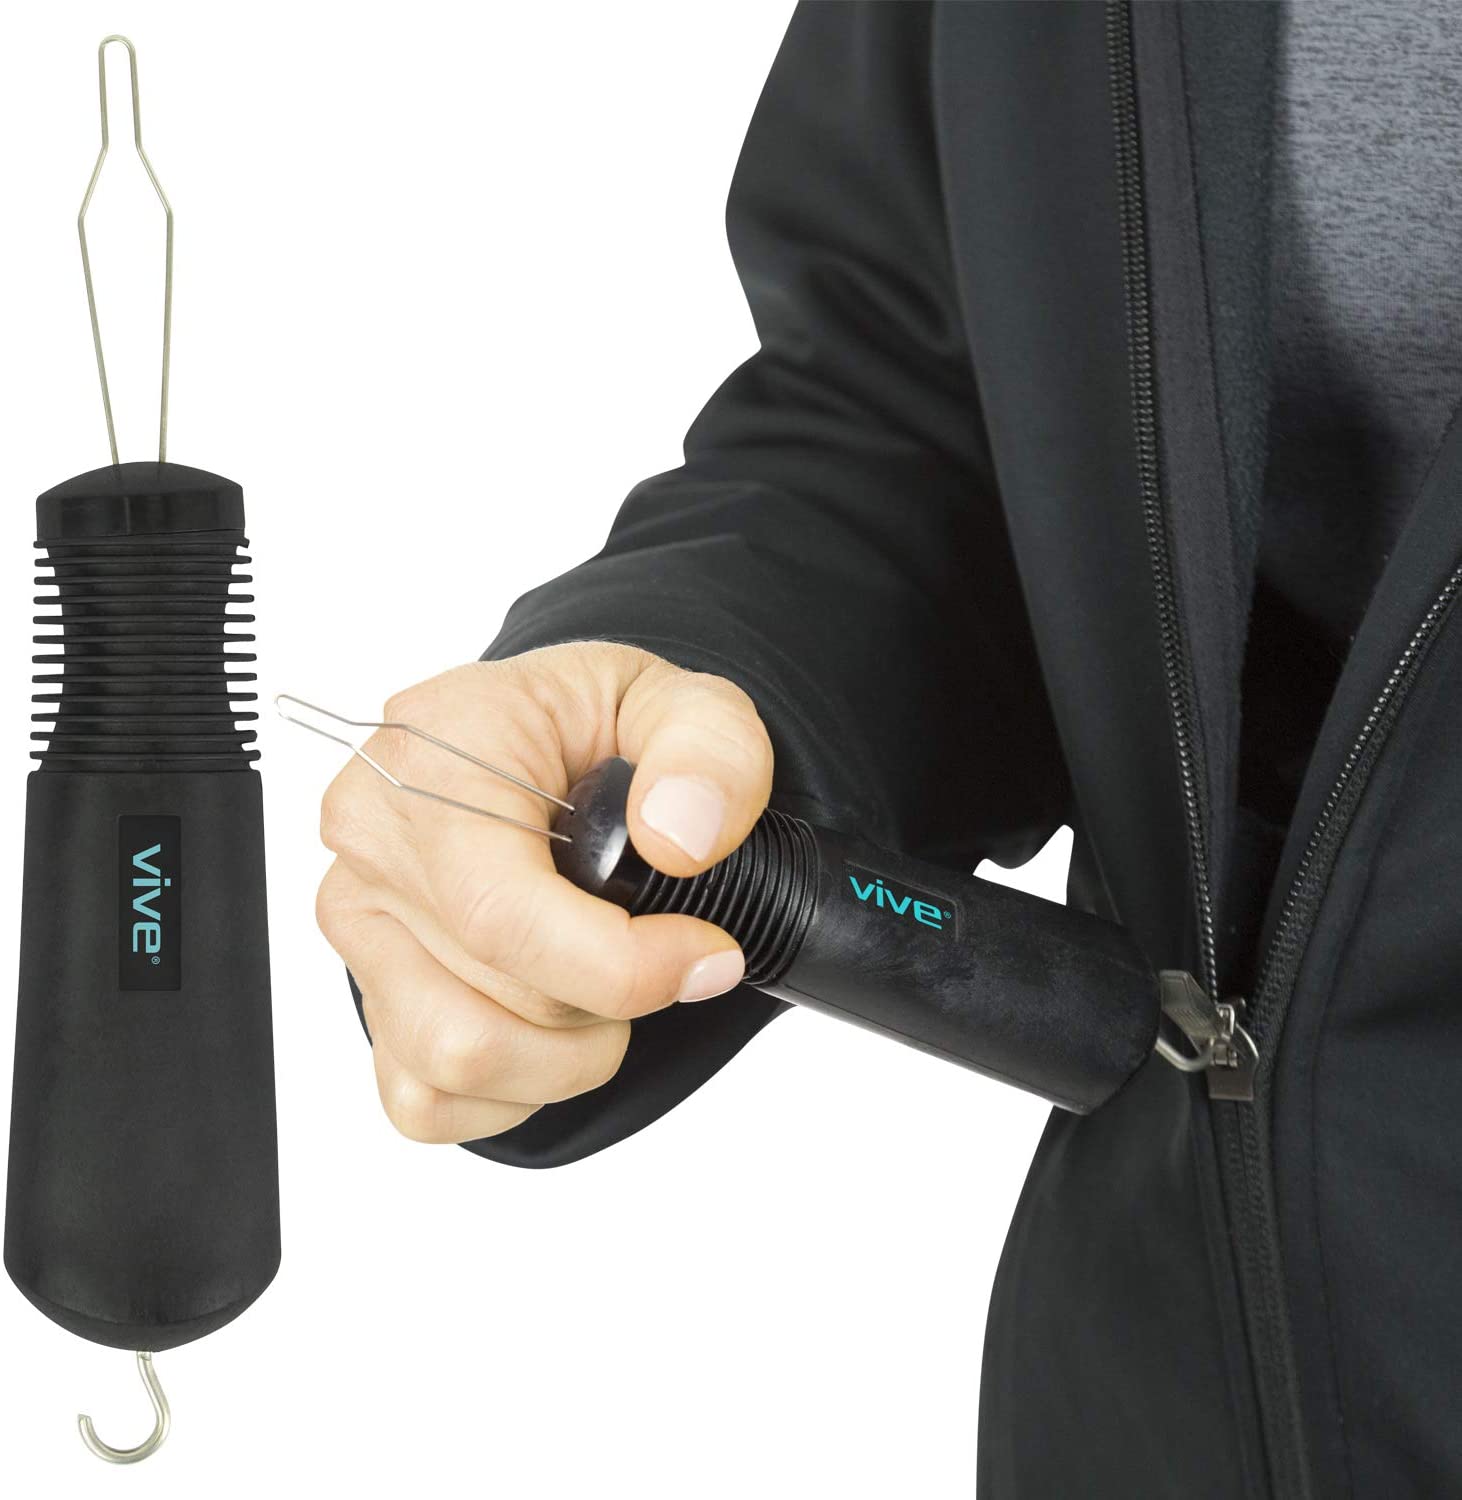 A black handheld device with a hook on one end and a loop on the other to assist with pulling zippers